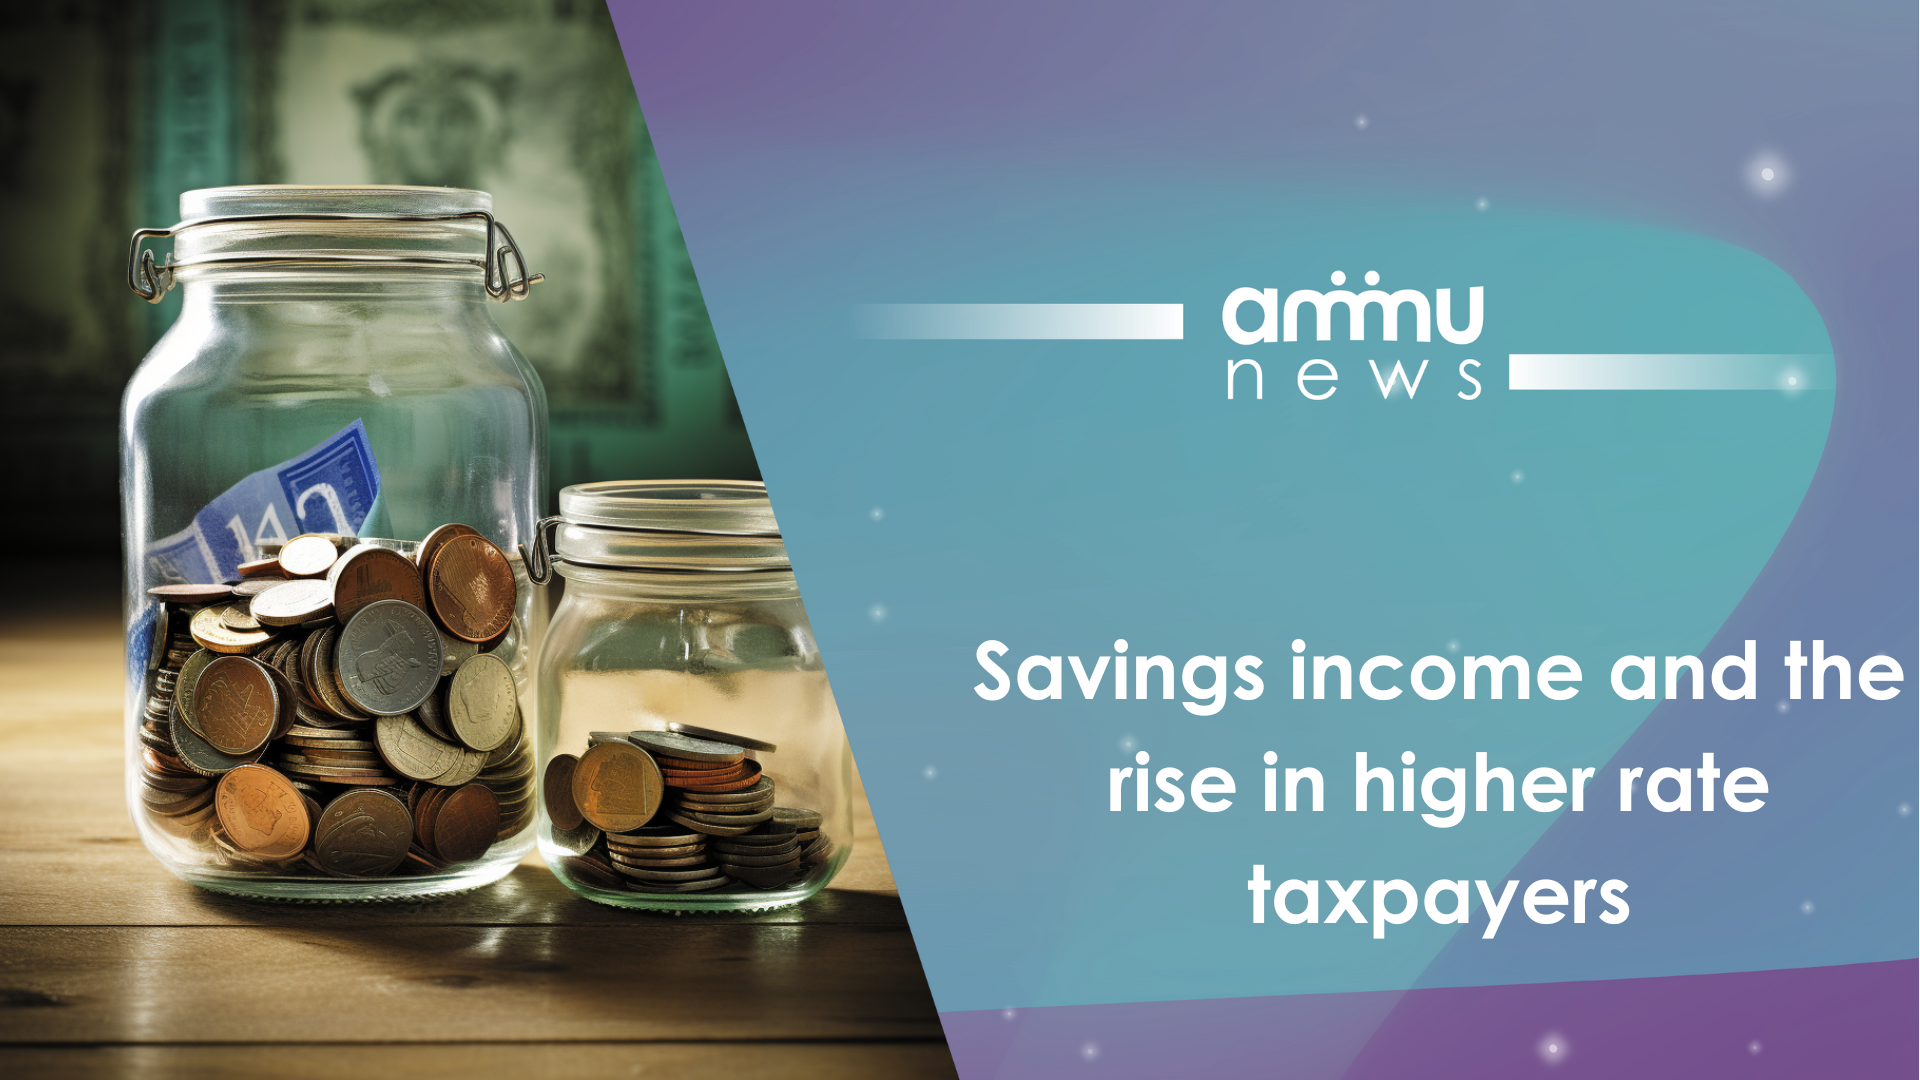 Savings income and the rise in higher rate taxpayers